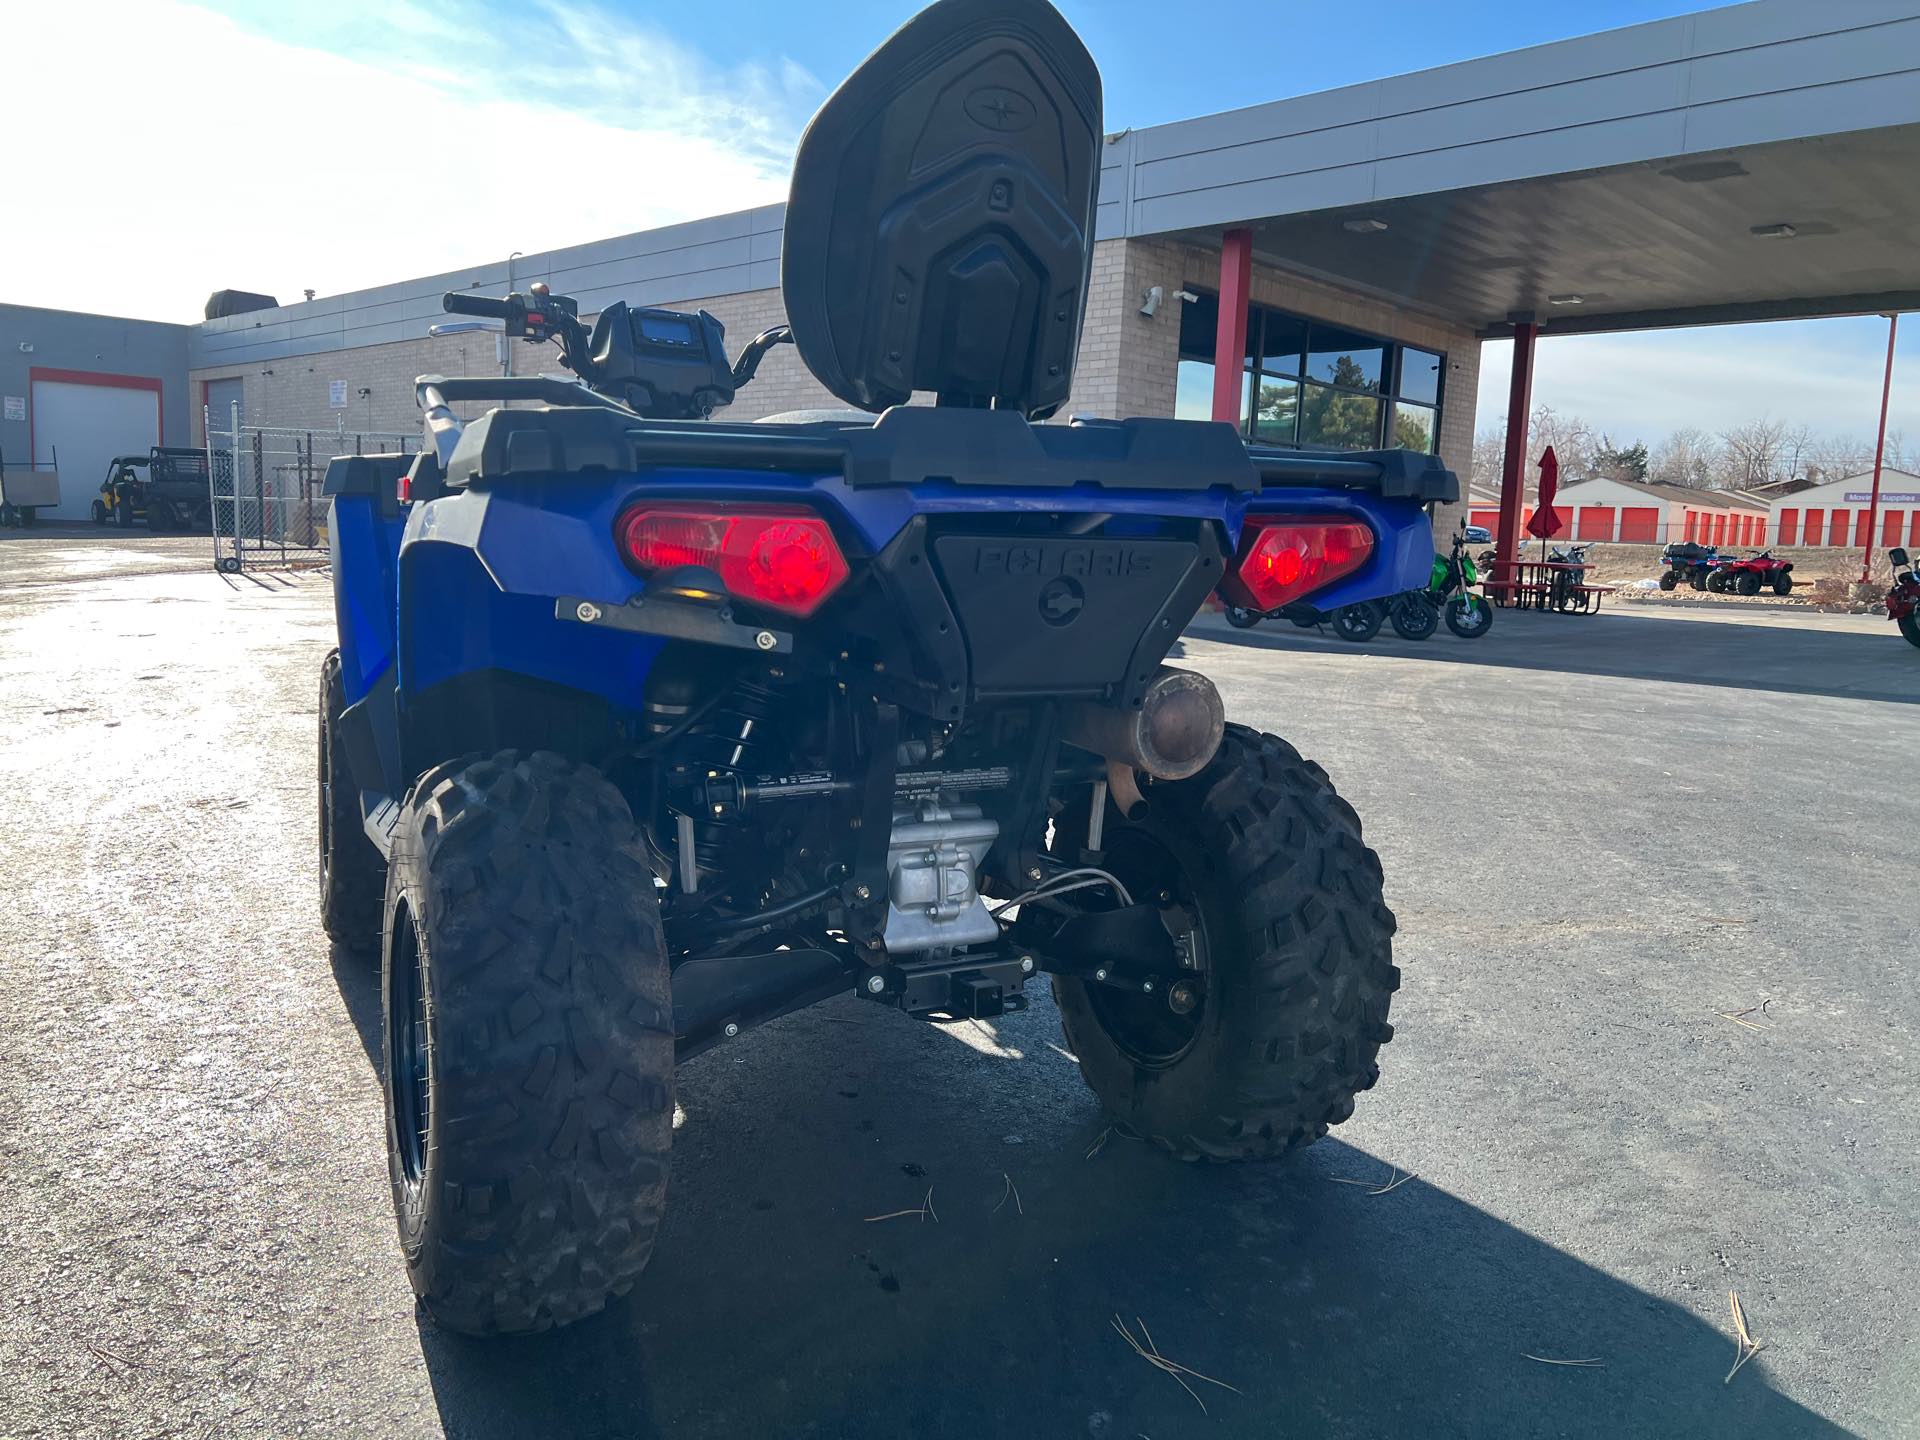 2022 Polaris Sportsman Touring 570 Base at Aces Motorcycles - Fort Collins